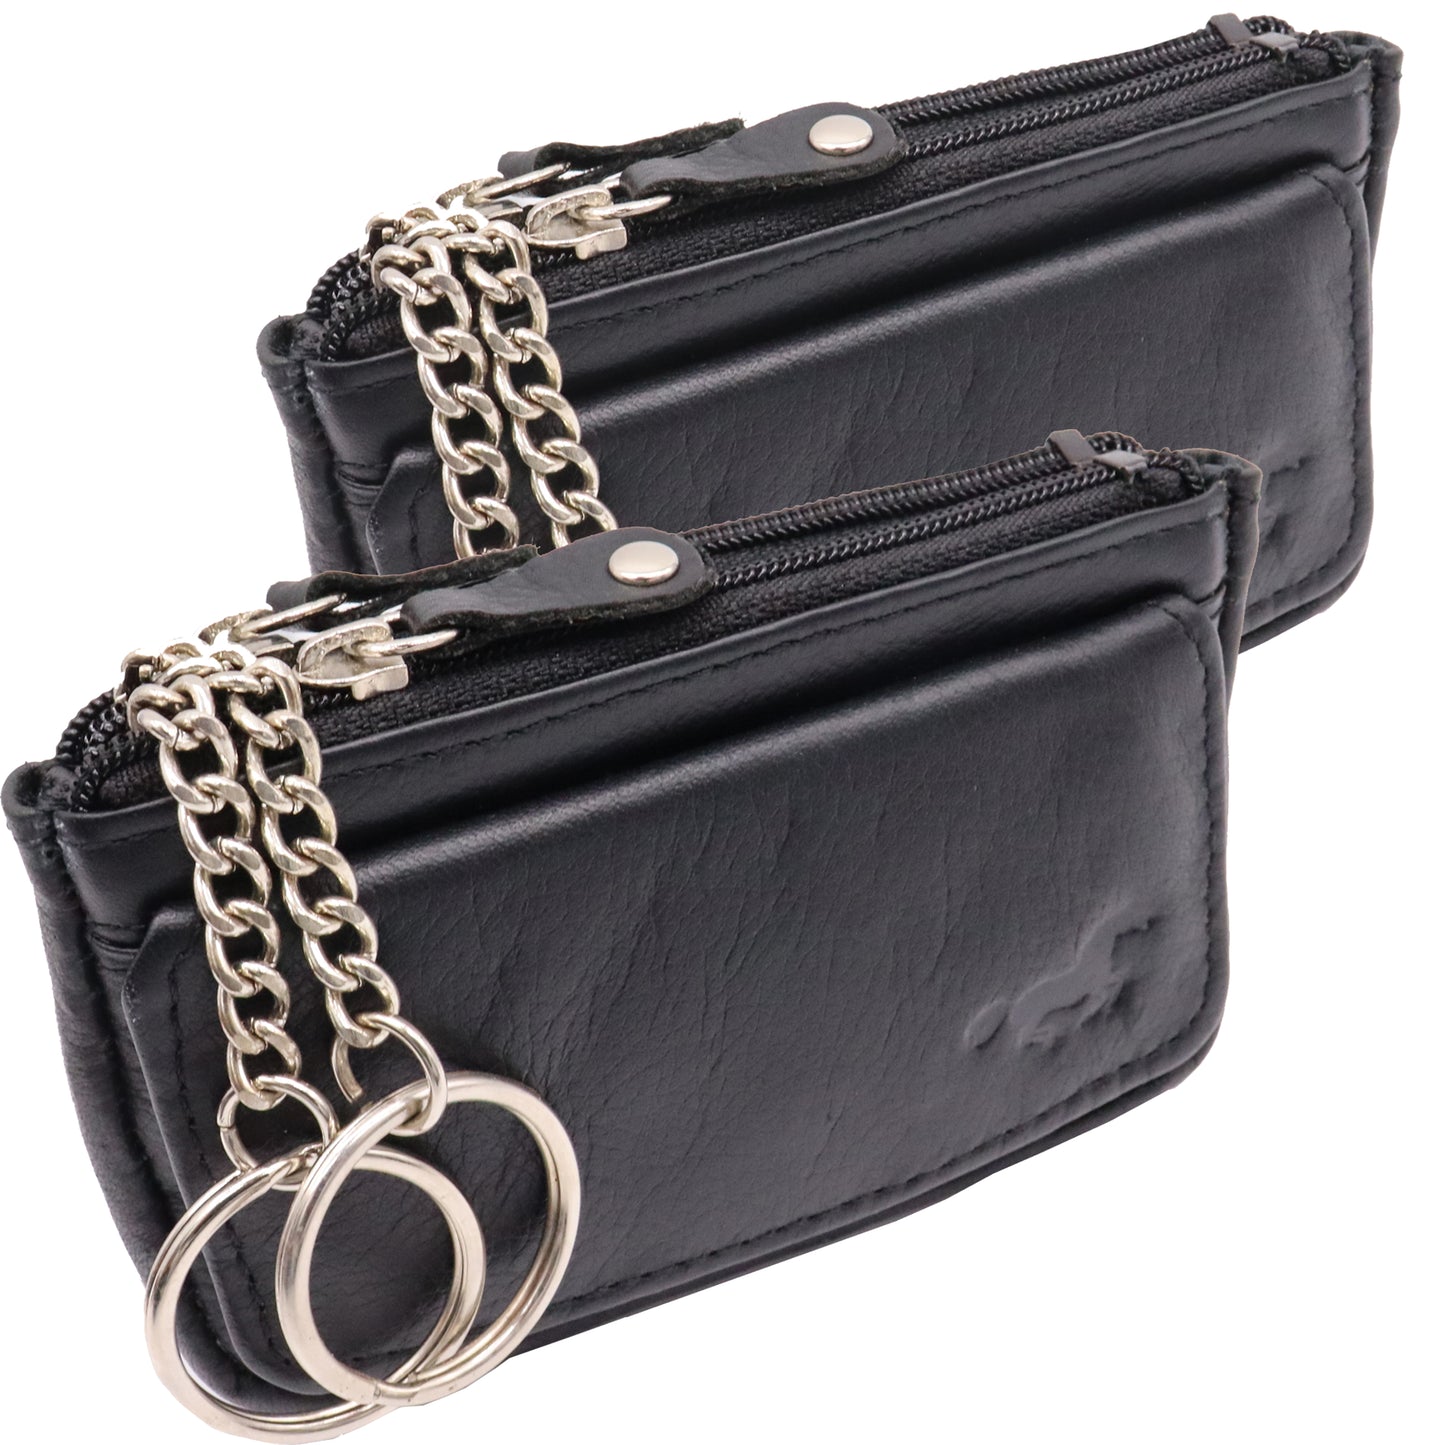 Safekeepers key pouch - key pouch with zipper - key pouch ladies - key folder - key purse - key pouch - key pouch men Black